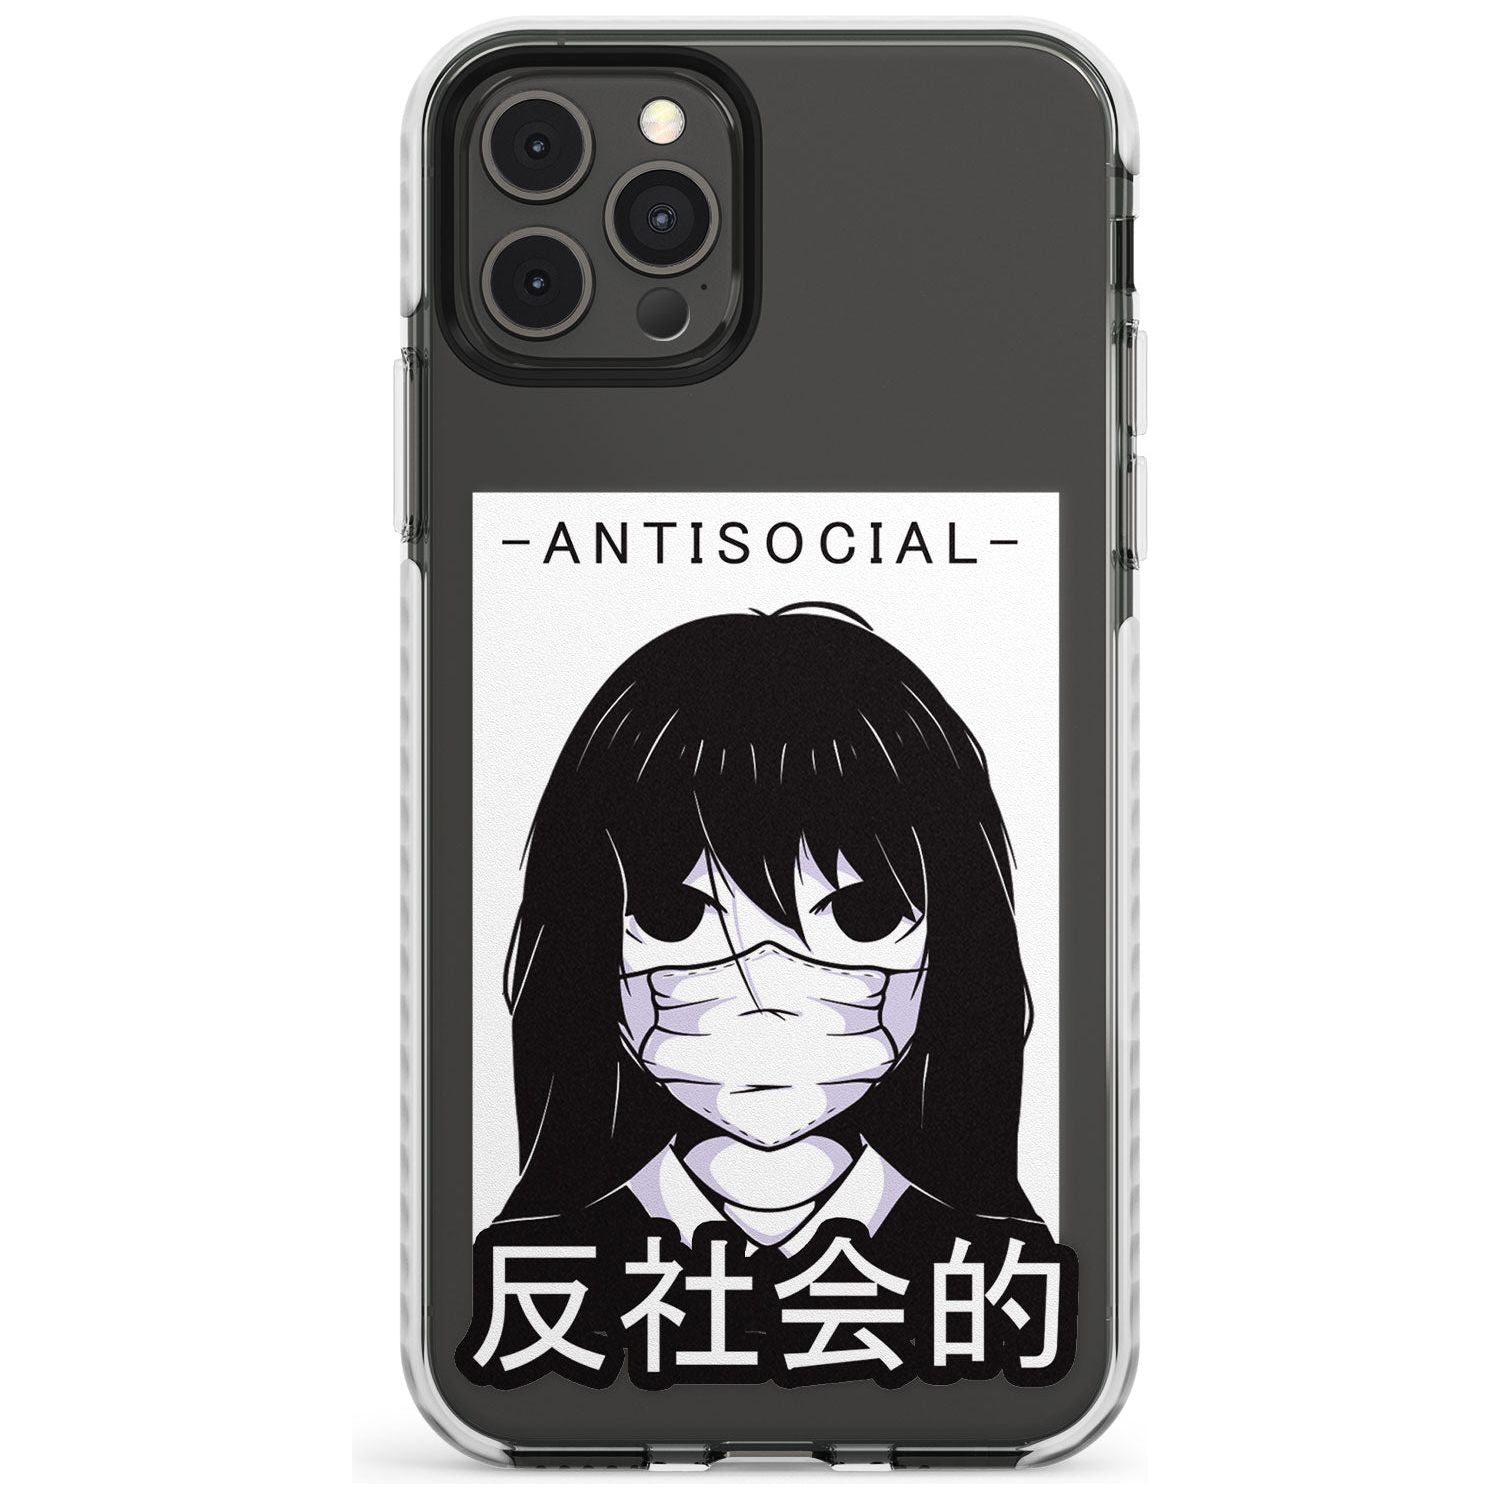 Anti-Social Impact Phone Case for iPhone 11 Pro Max